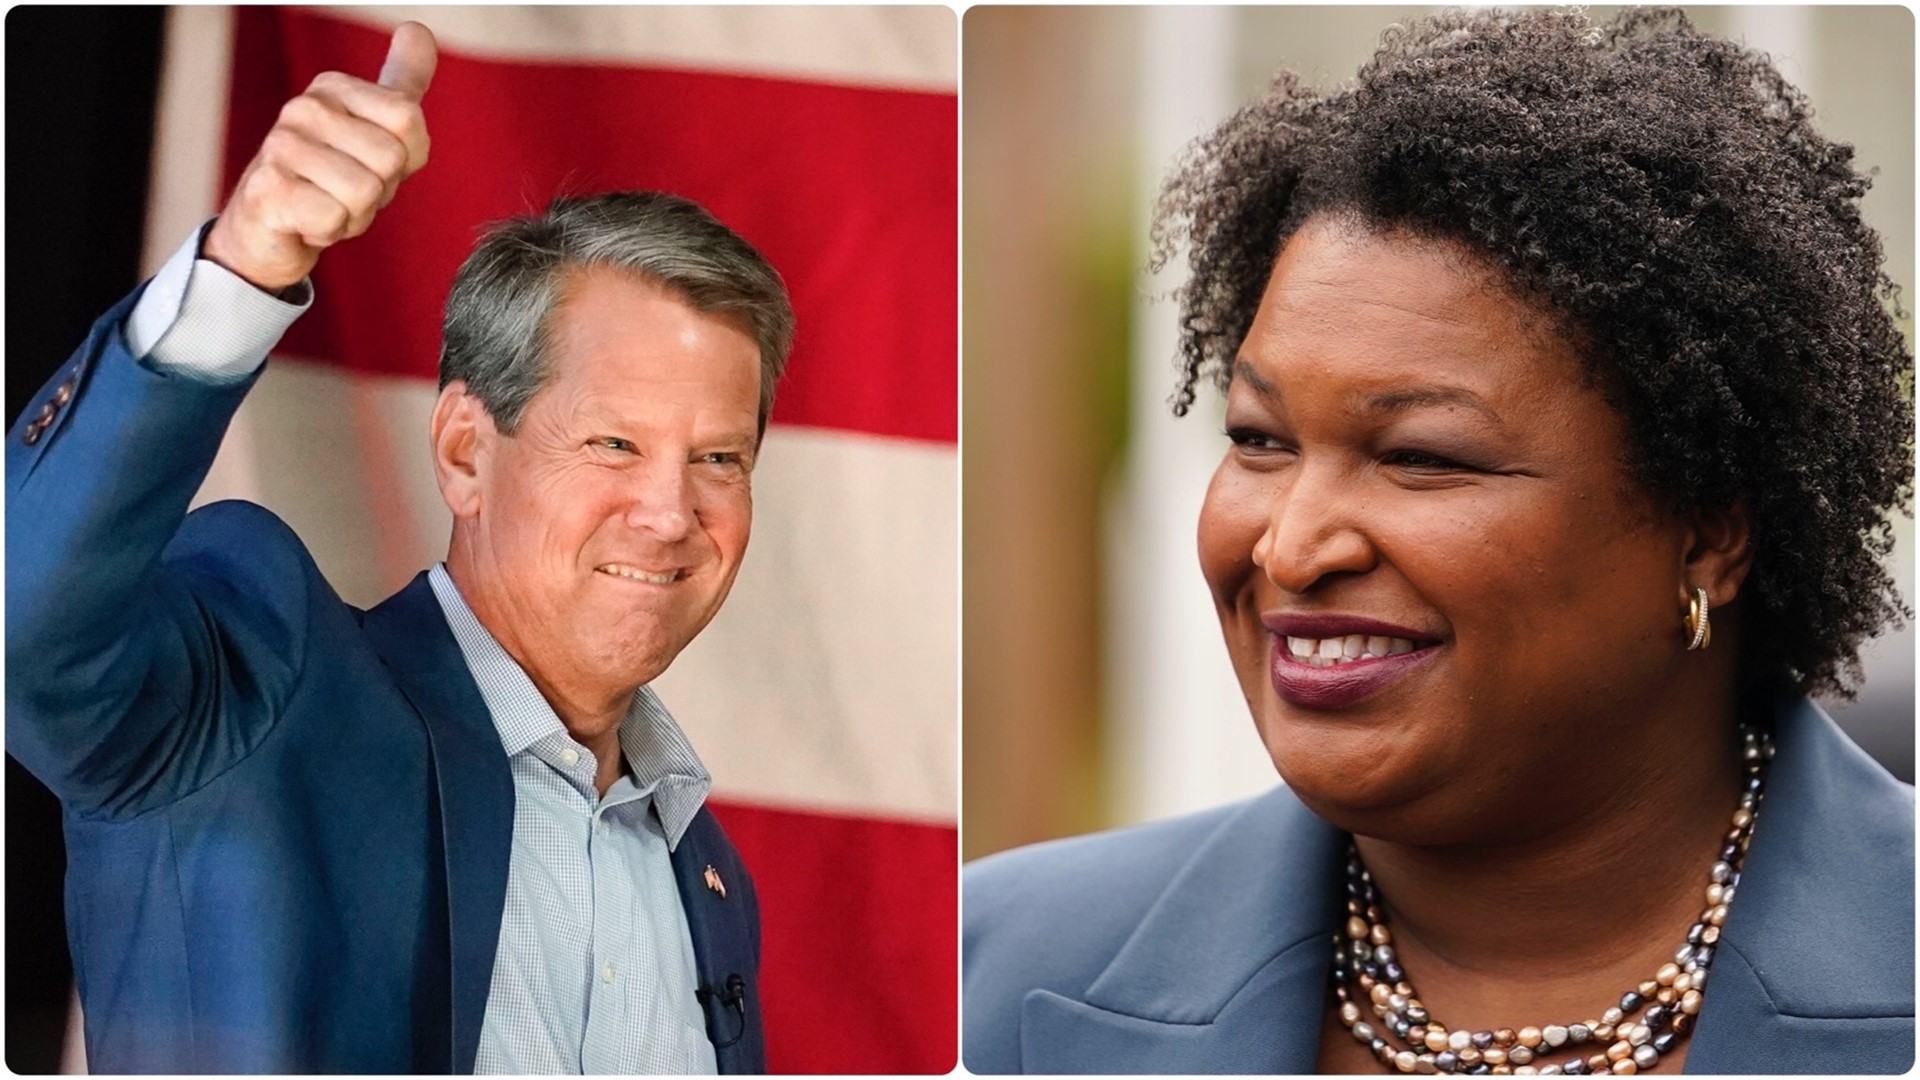 With just 15 weeks until Election Day, a new 11Alive poll shows a tight race between incumbent Gov. Brian Kemp and Stacey Abrams as they vie for votes.